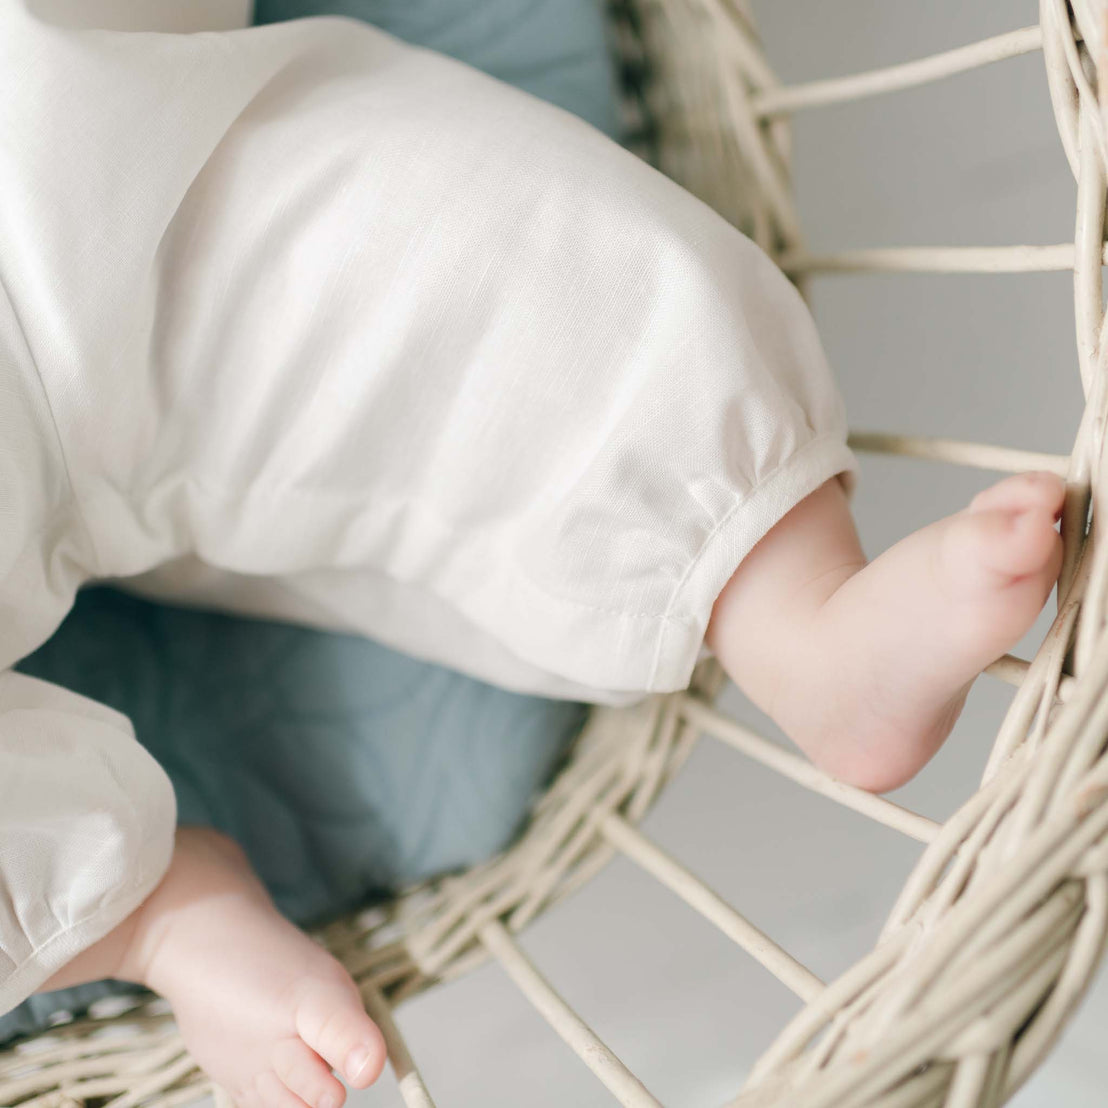 A close-up image of a baby's feet and legs clad in a soft white Owen Linen Romper, folded and poking through a woven basket on a light background.